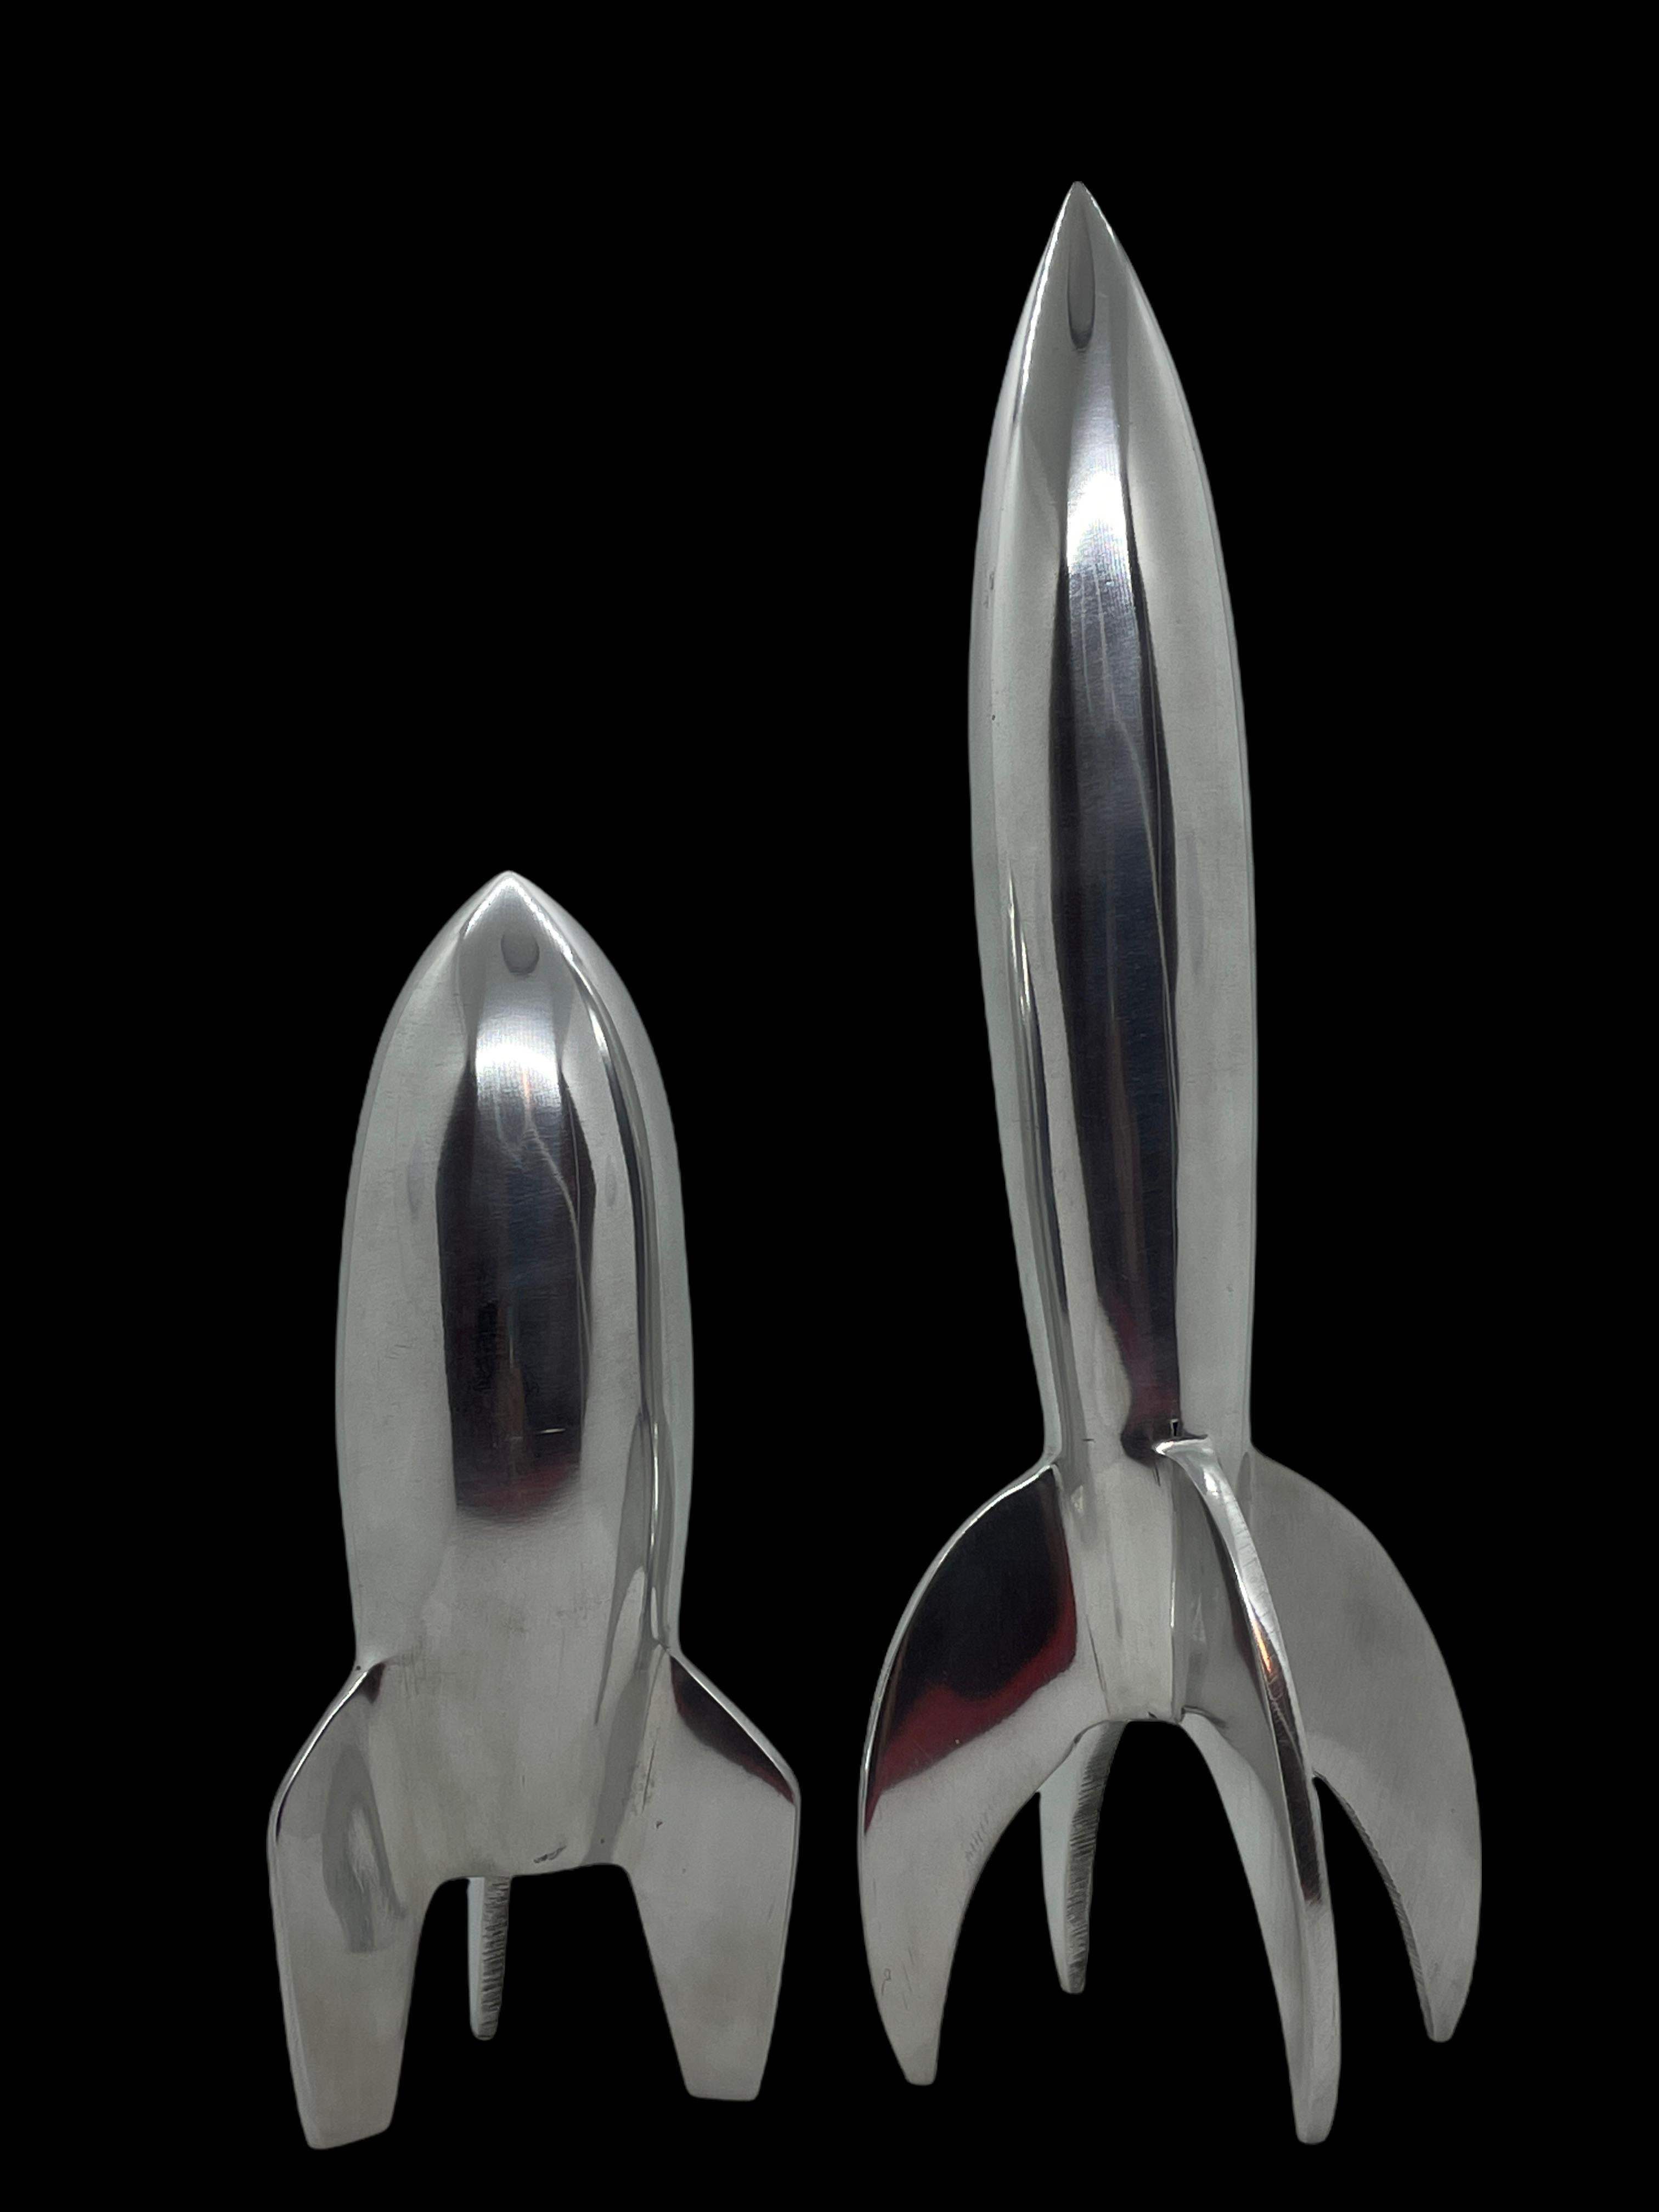 Scaled model of two Rocket statues. Hand-spun in metal. A nice architectural sculpture for every living room or desktop. Tallest measures approximate 11.5